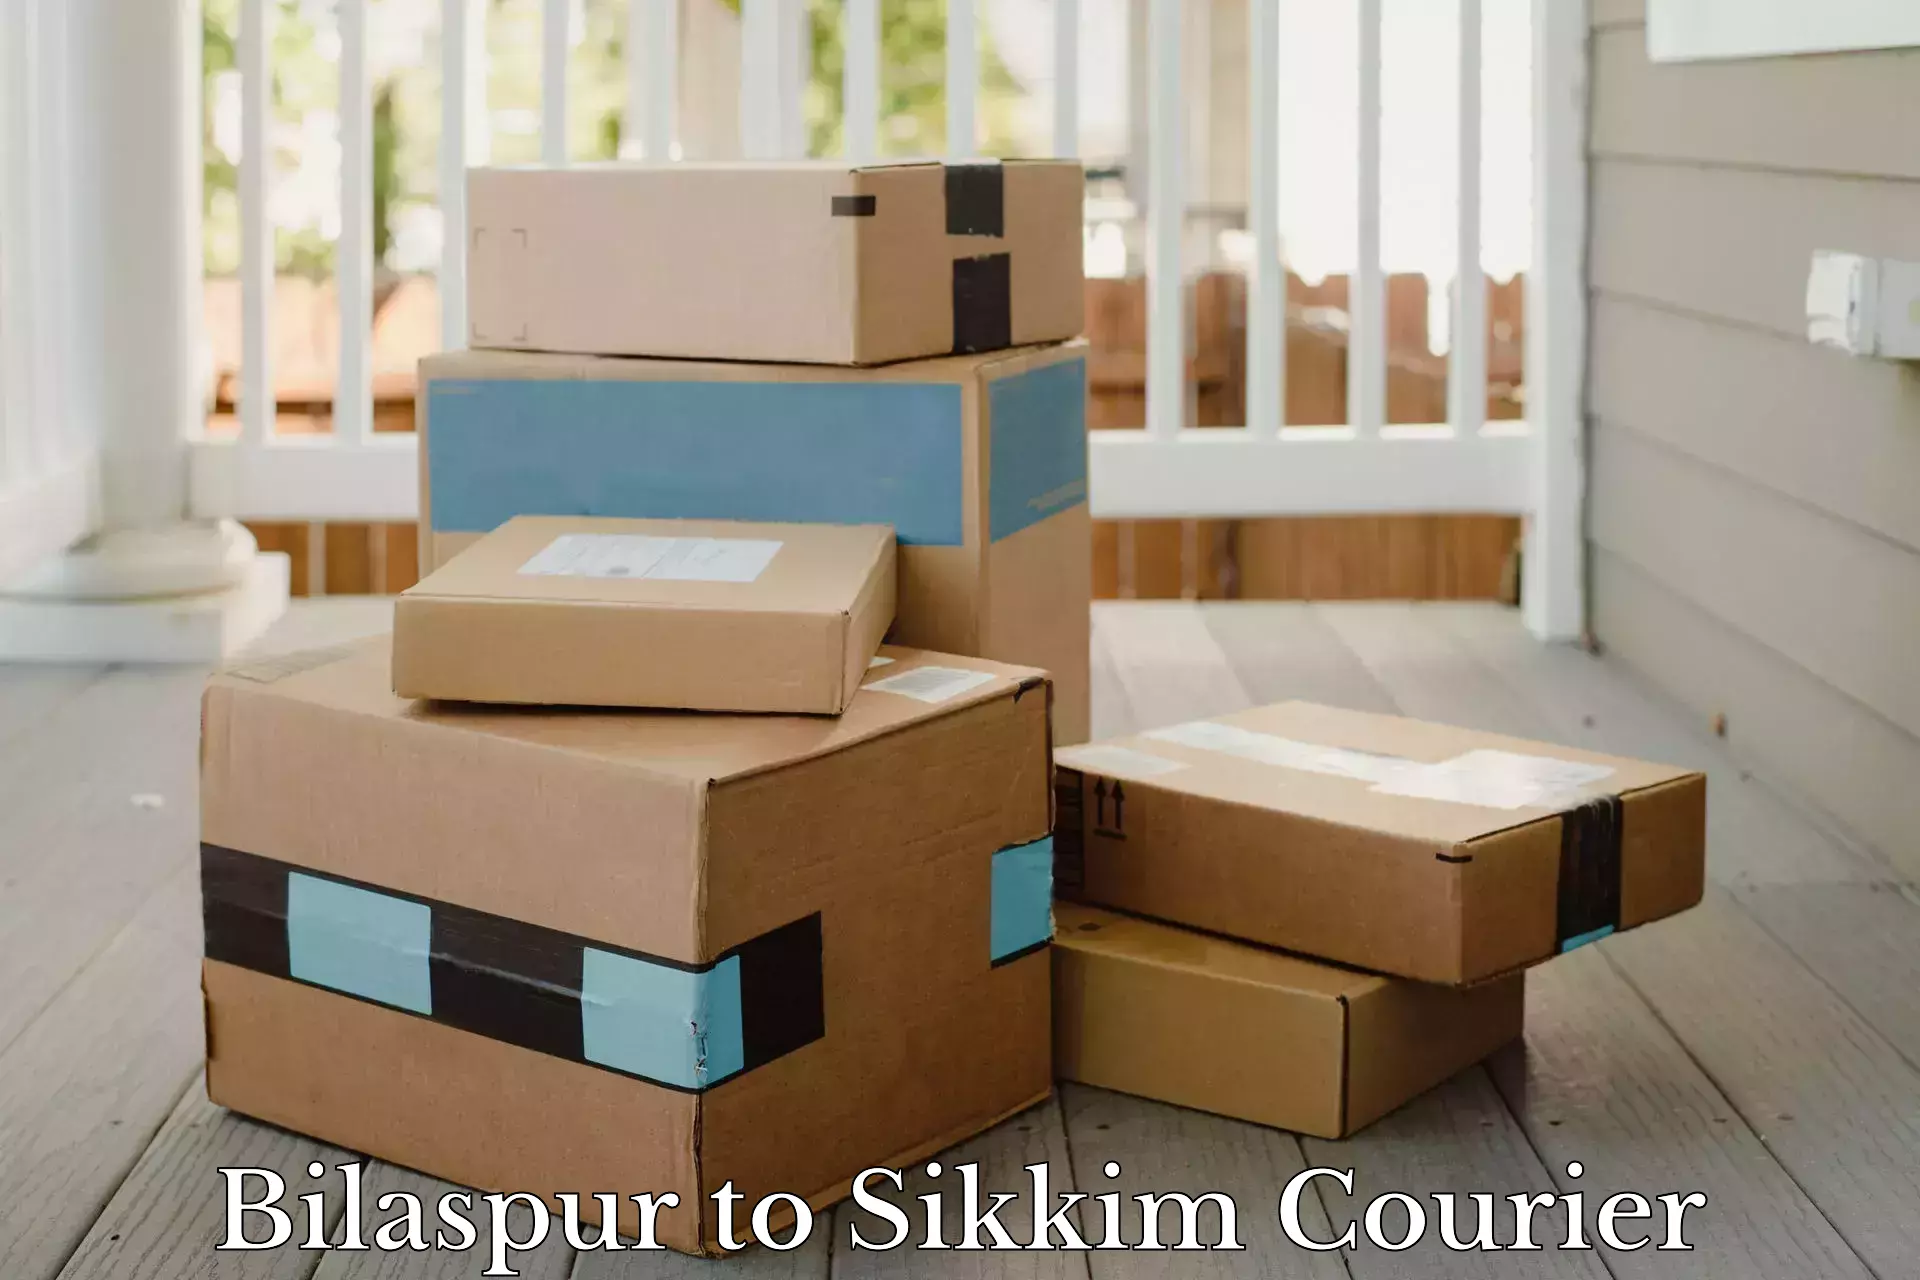 Delivery service partnership Bilaspur to East Sikkim